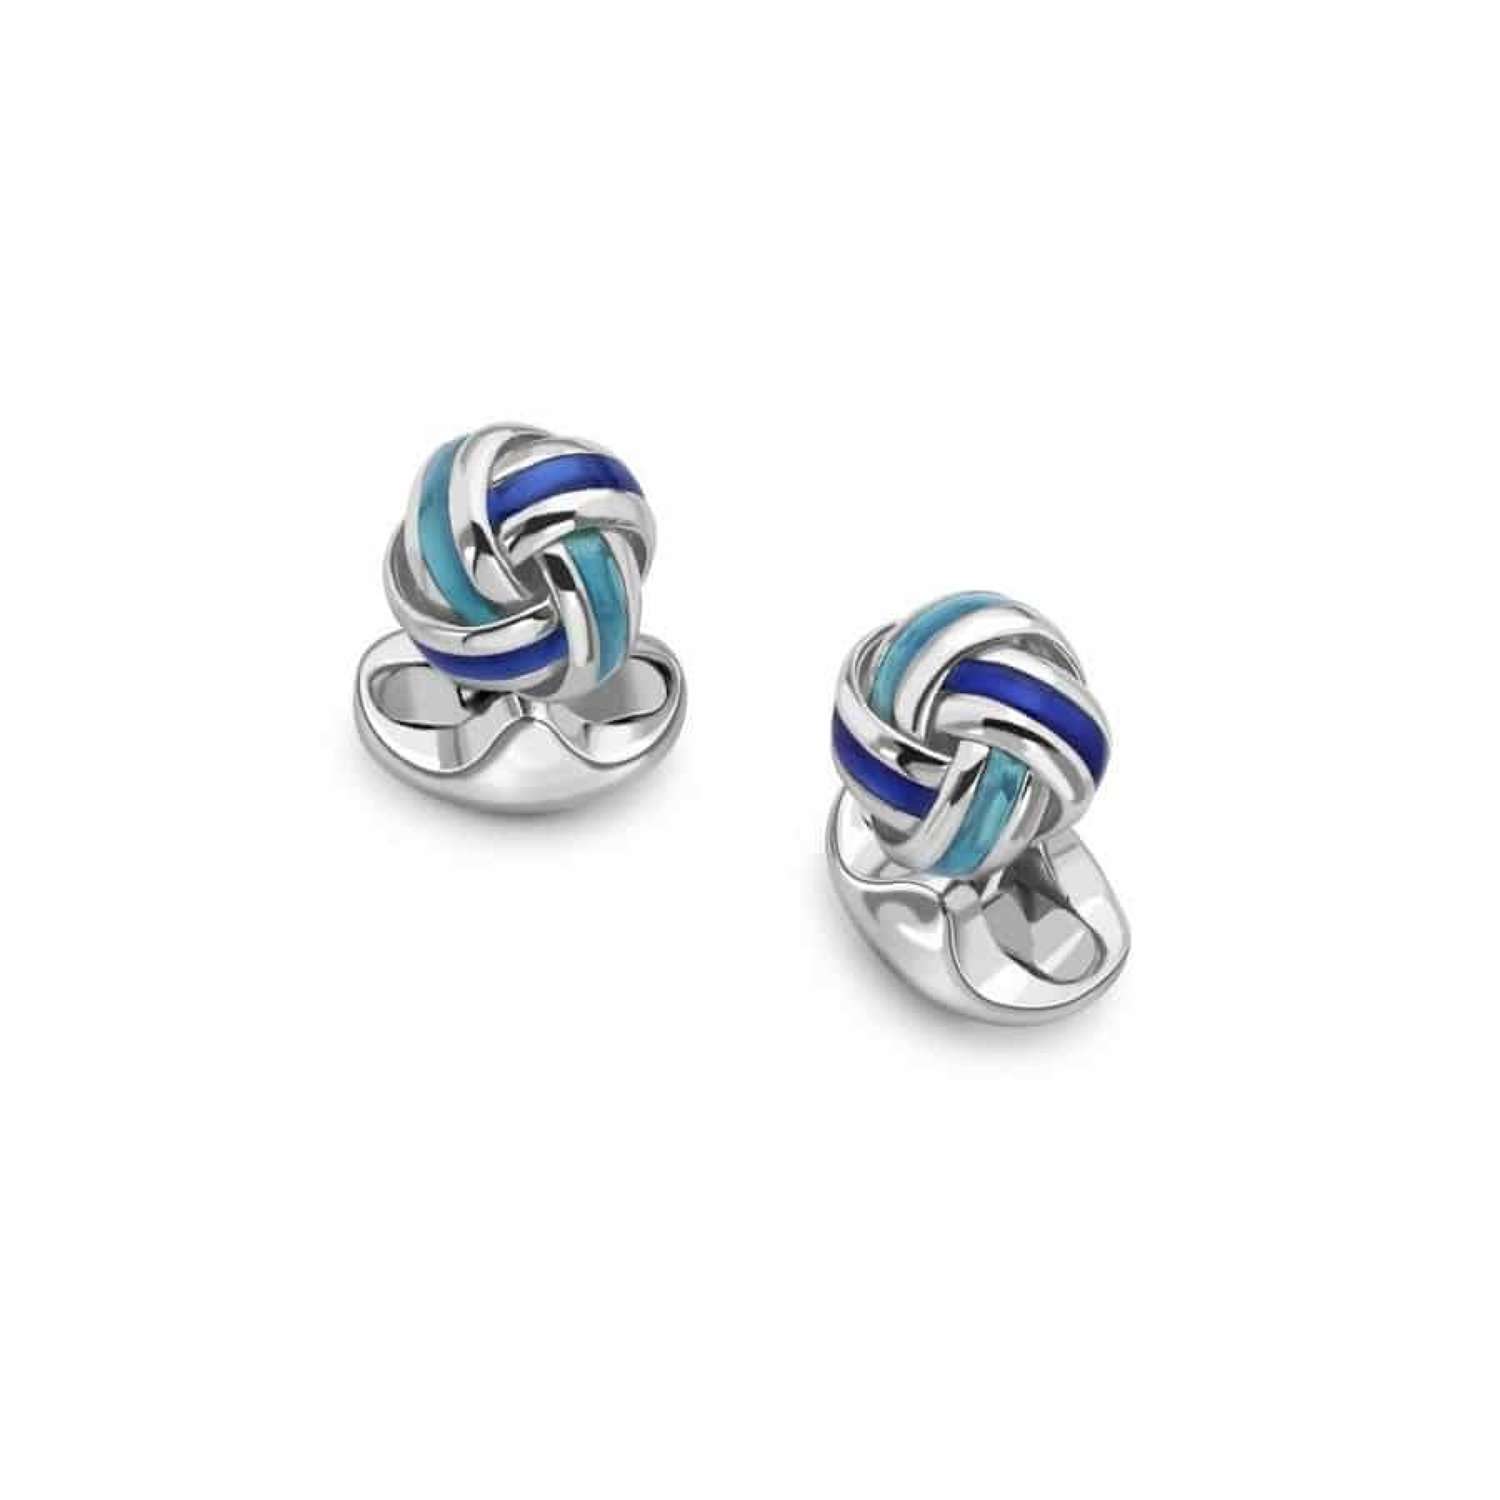 Classic silver and enamel knot cufflinks